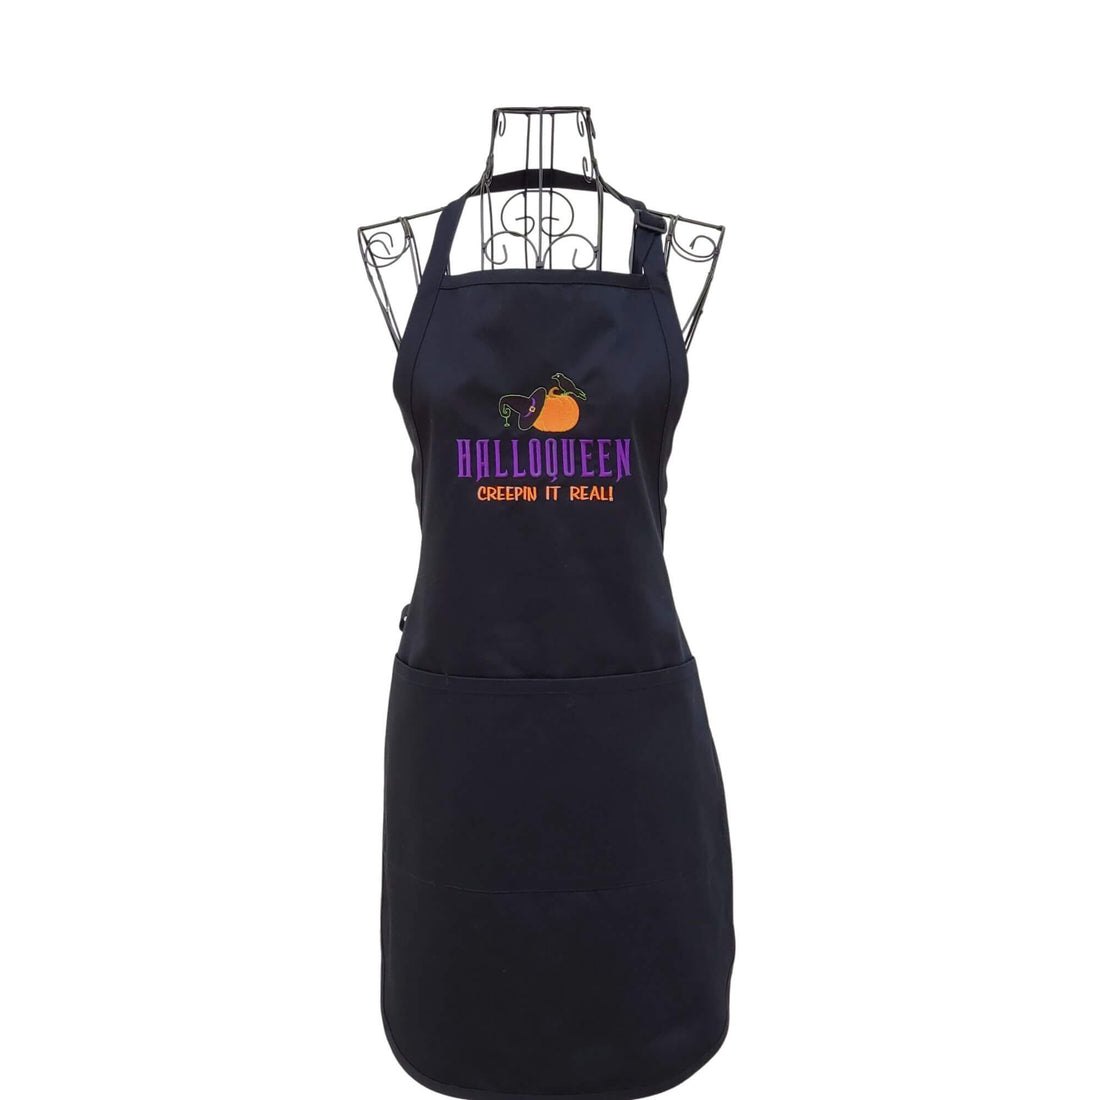 Funny Black Halloween embroidered apron for women. - Life Has Just Begun